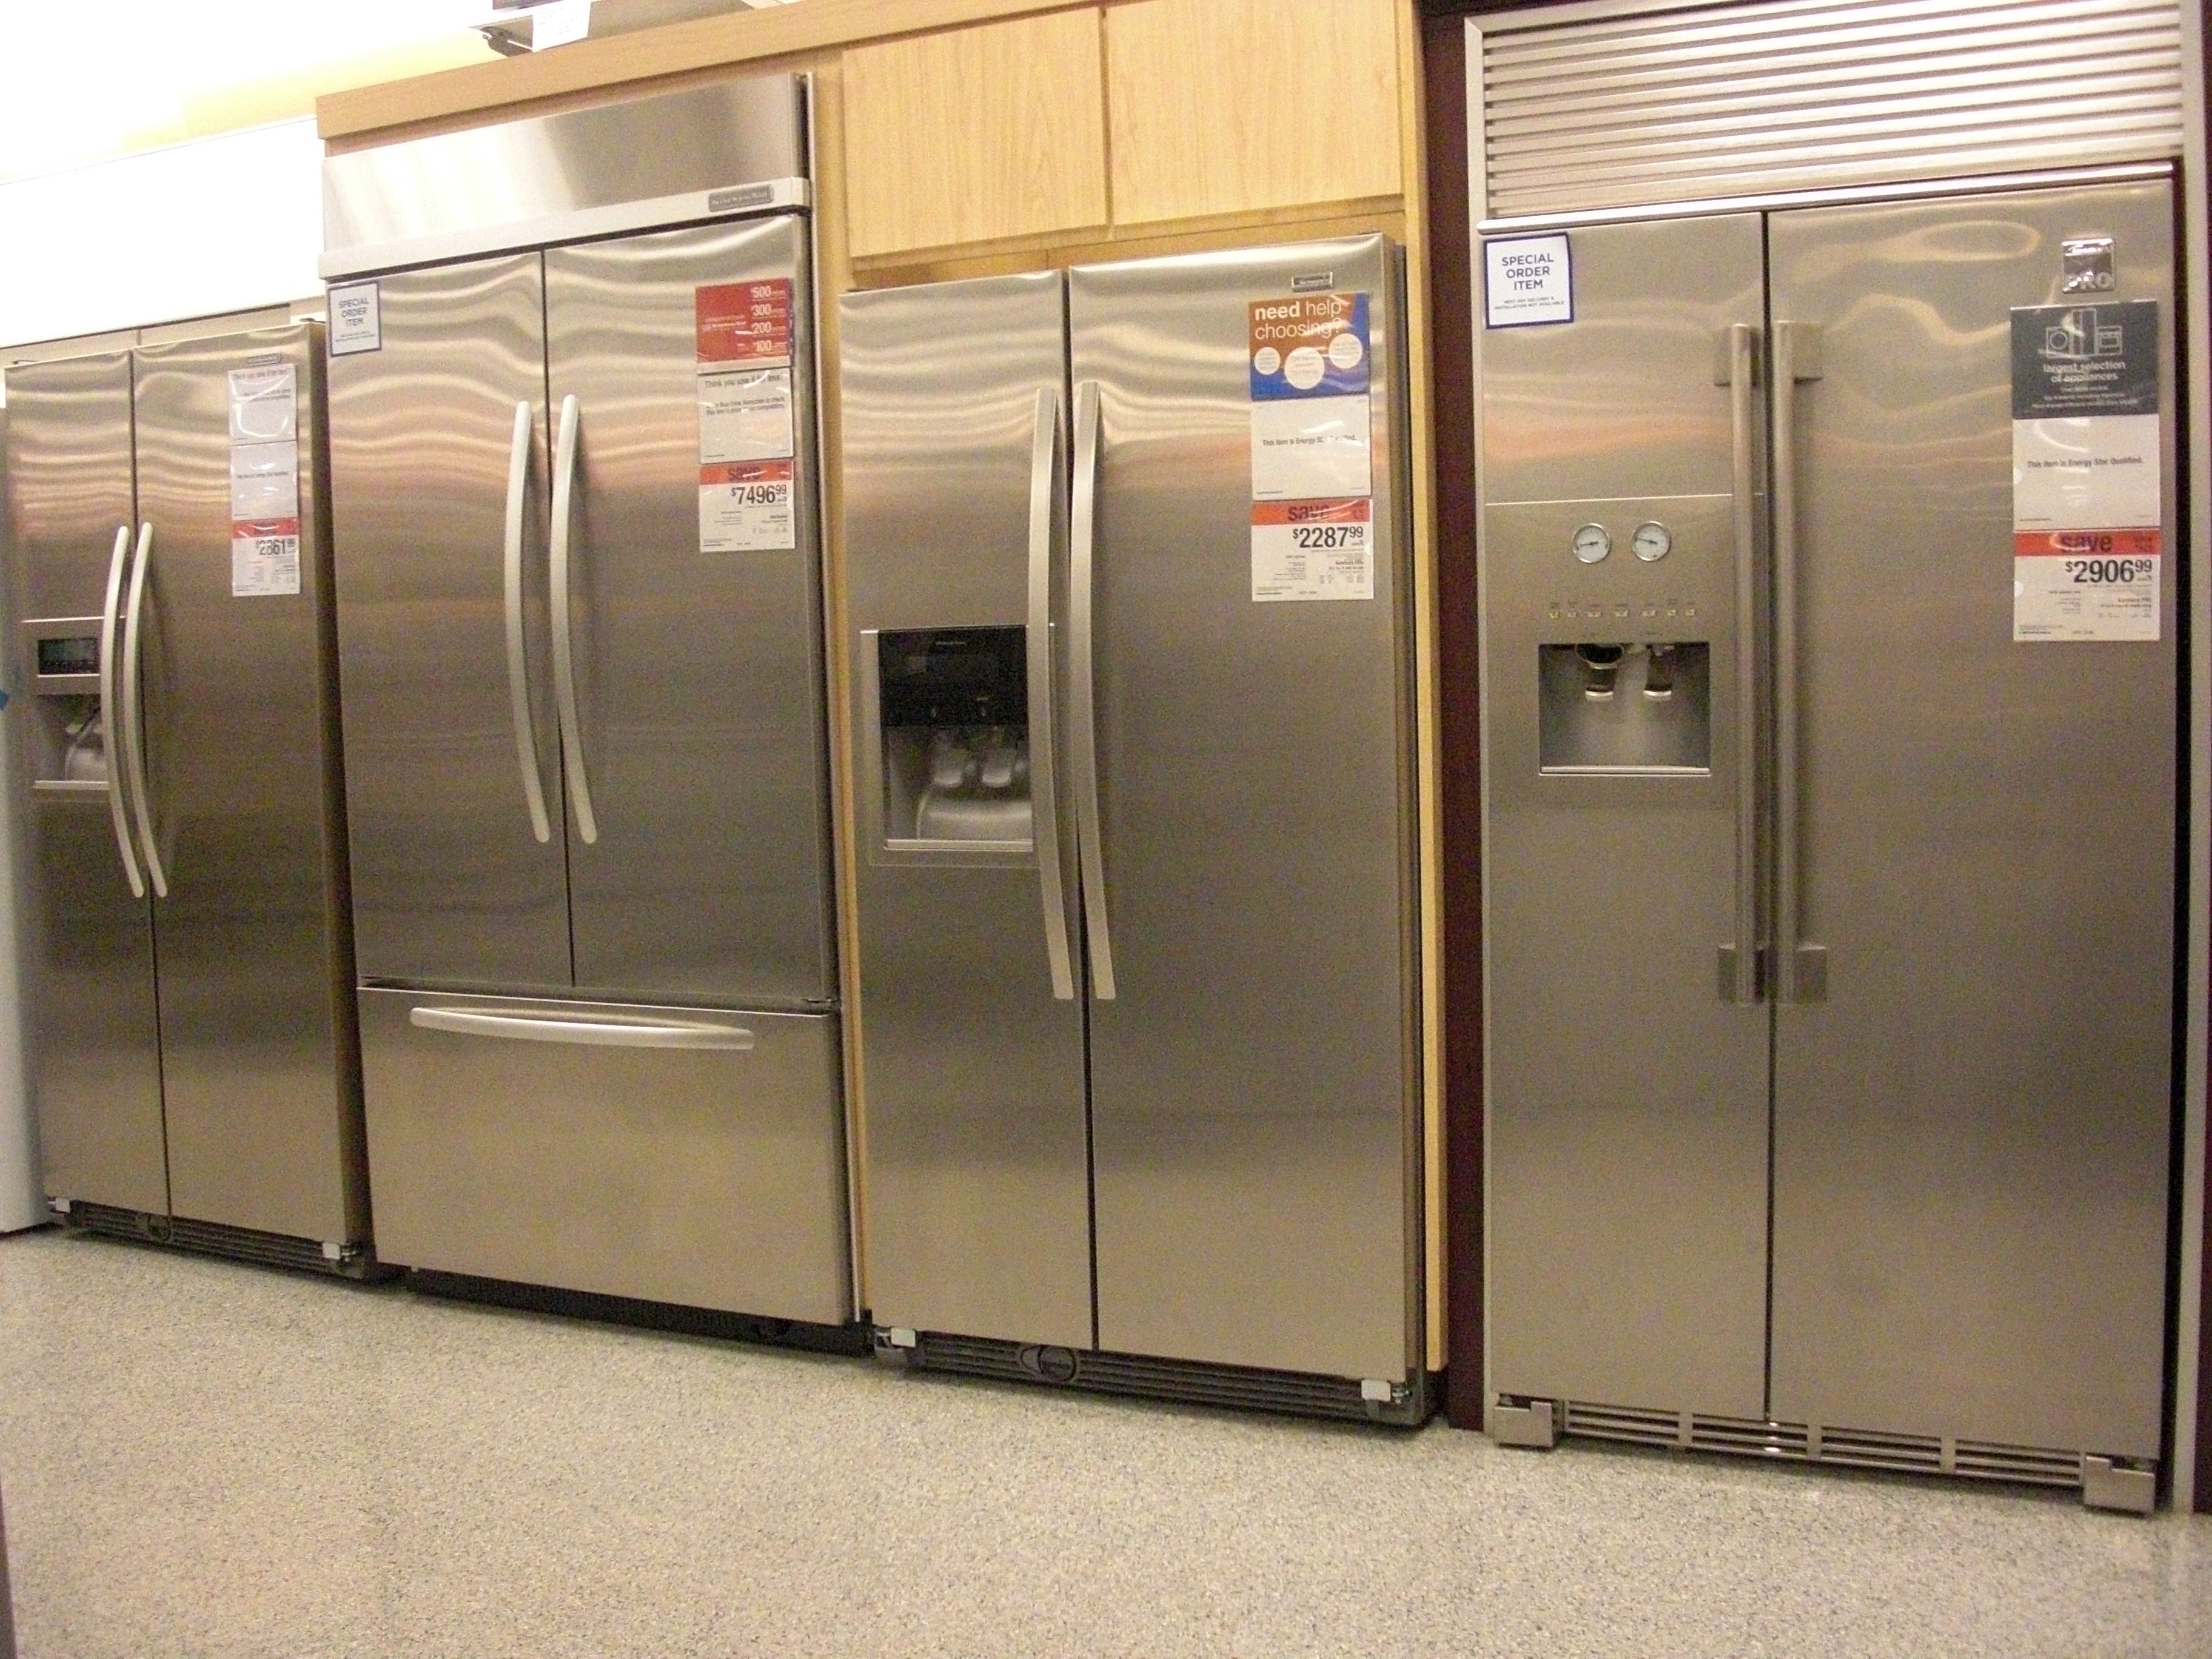 Refrigerators for Louisville home